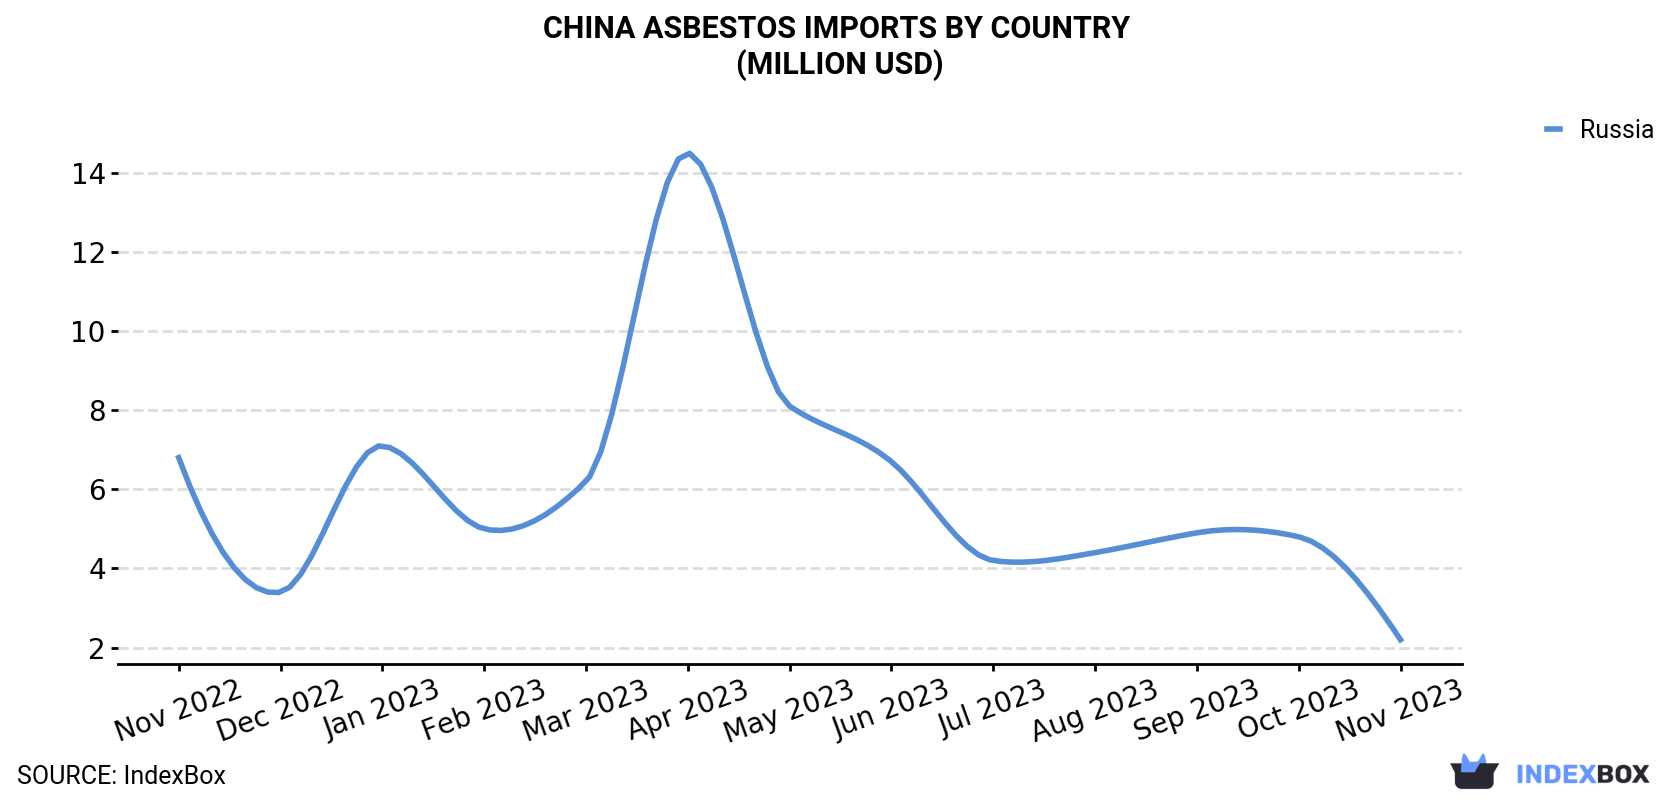 China Asbestos Imports By Country (Million USD)